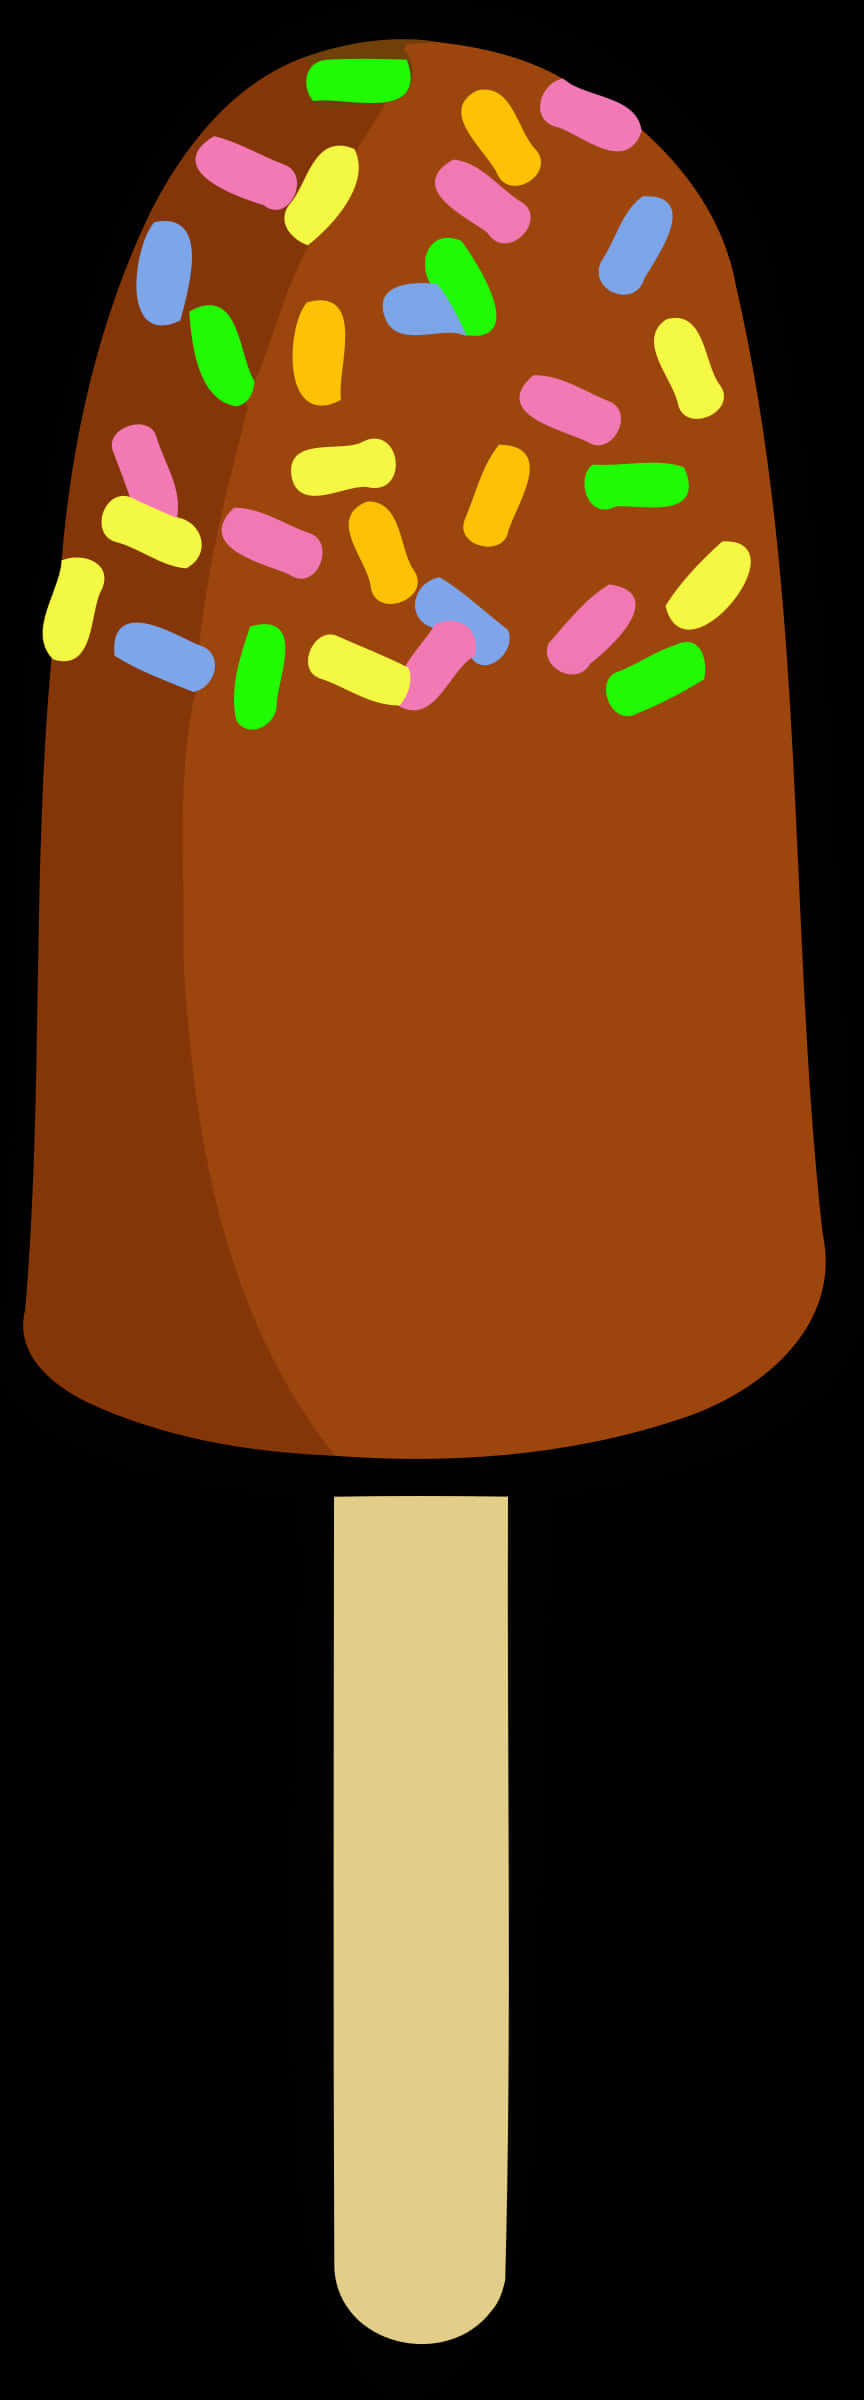 Chocolate Sprinkled Ice Cream Popsicle Clipart PNG